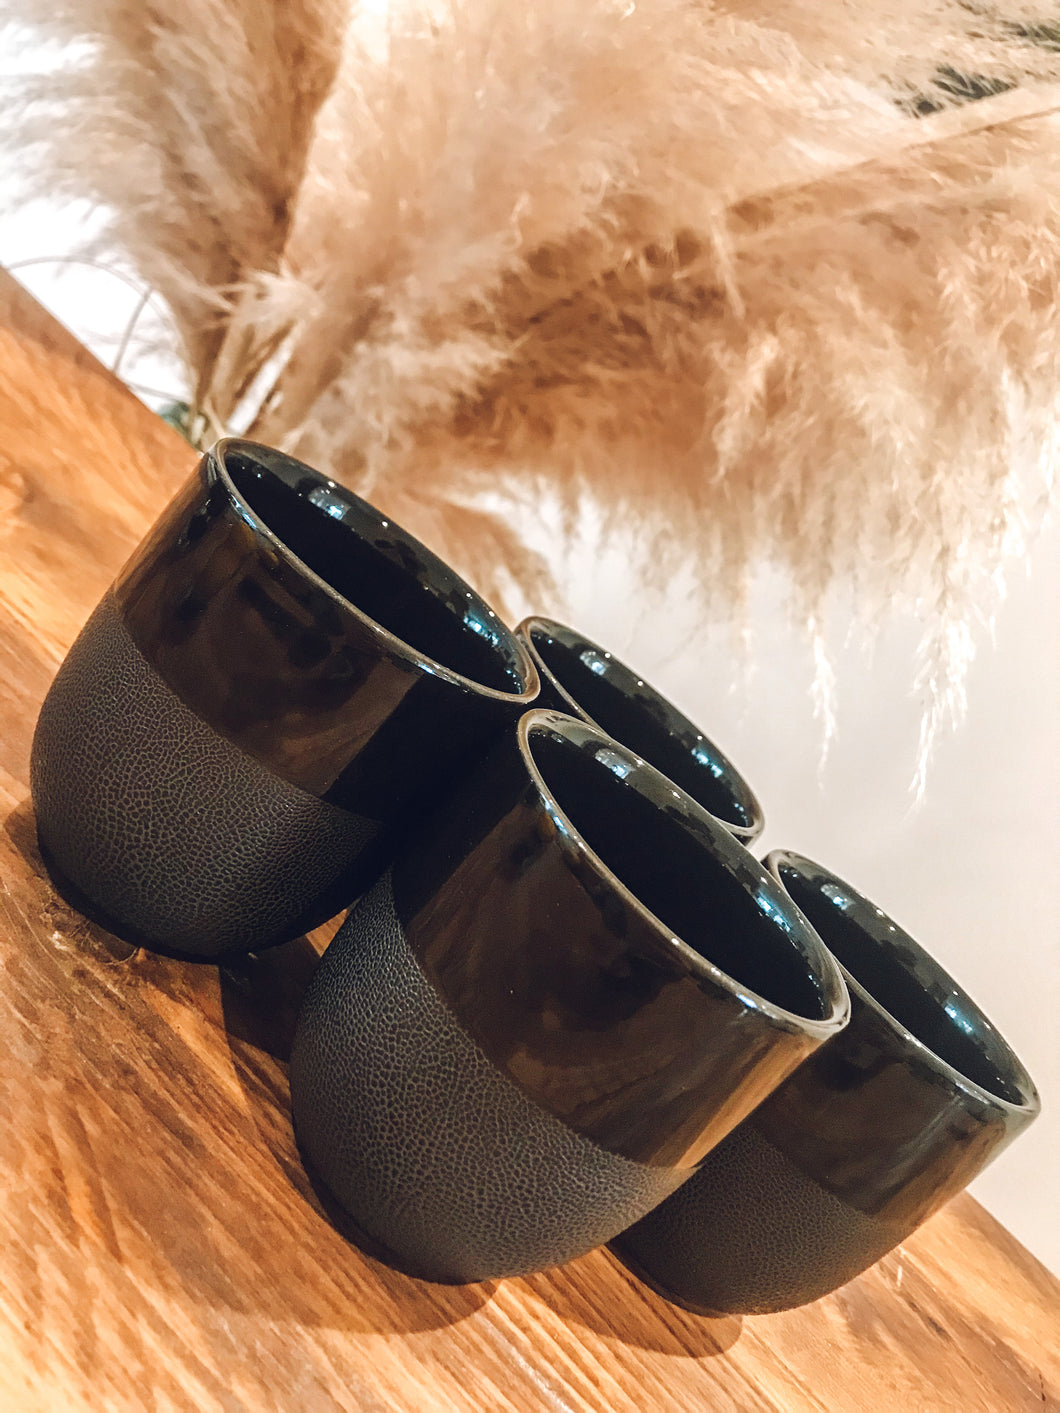 Textured black | flat white | coffee cups | set of four